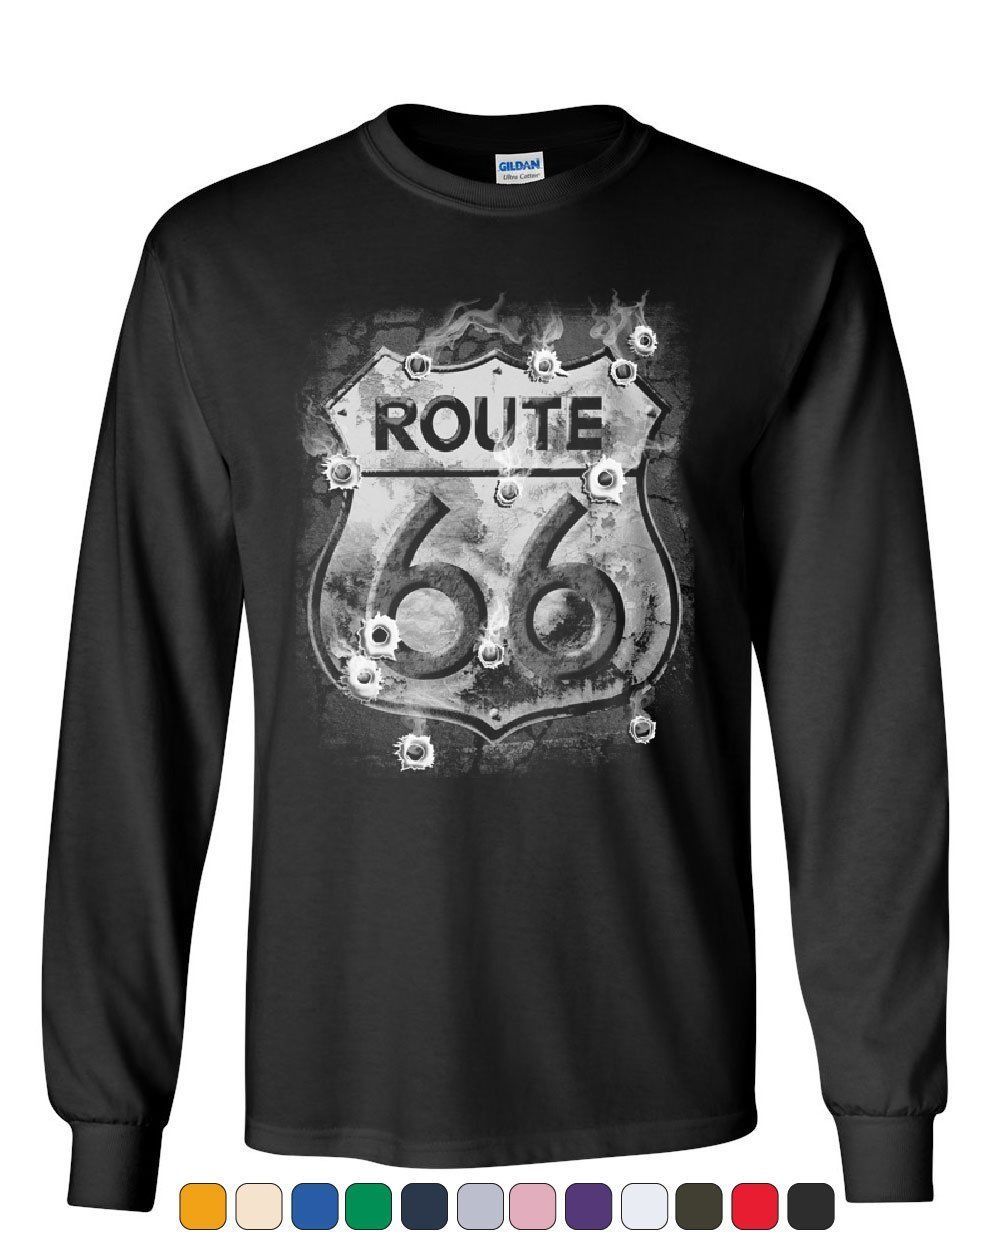 Route 66 Long Sleeve T-Shirt Bullet Holes The Mother Road American Highway Tee